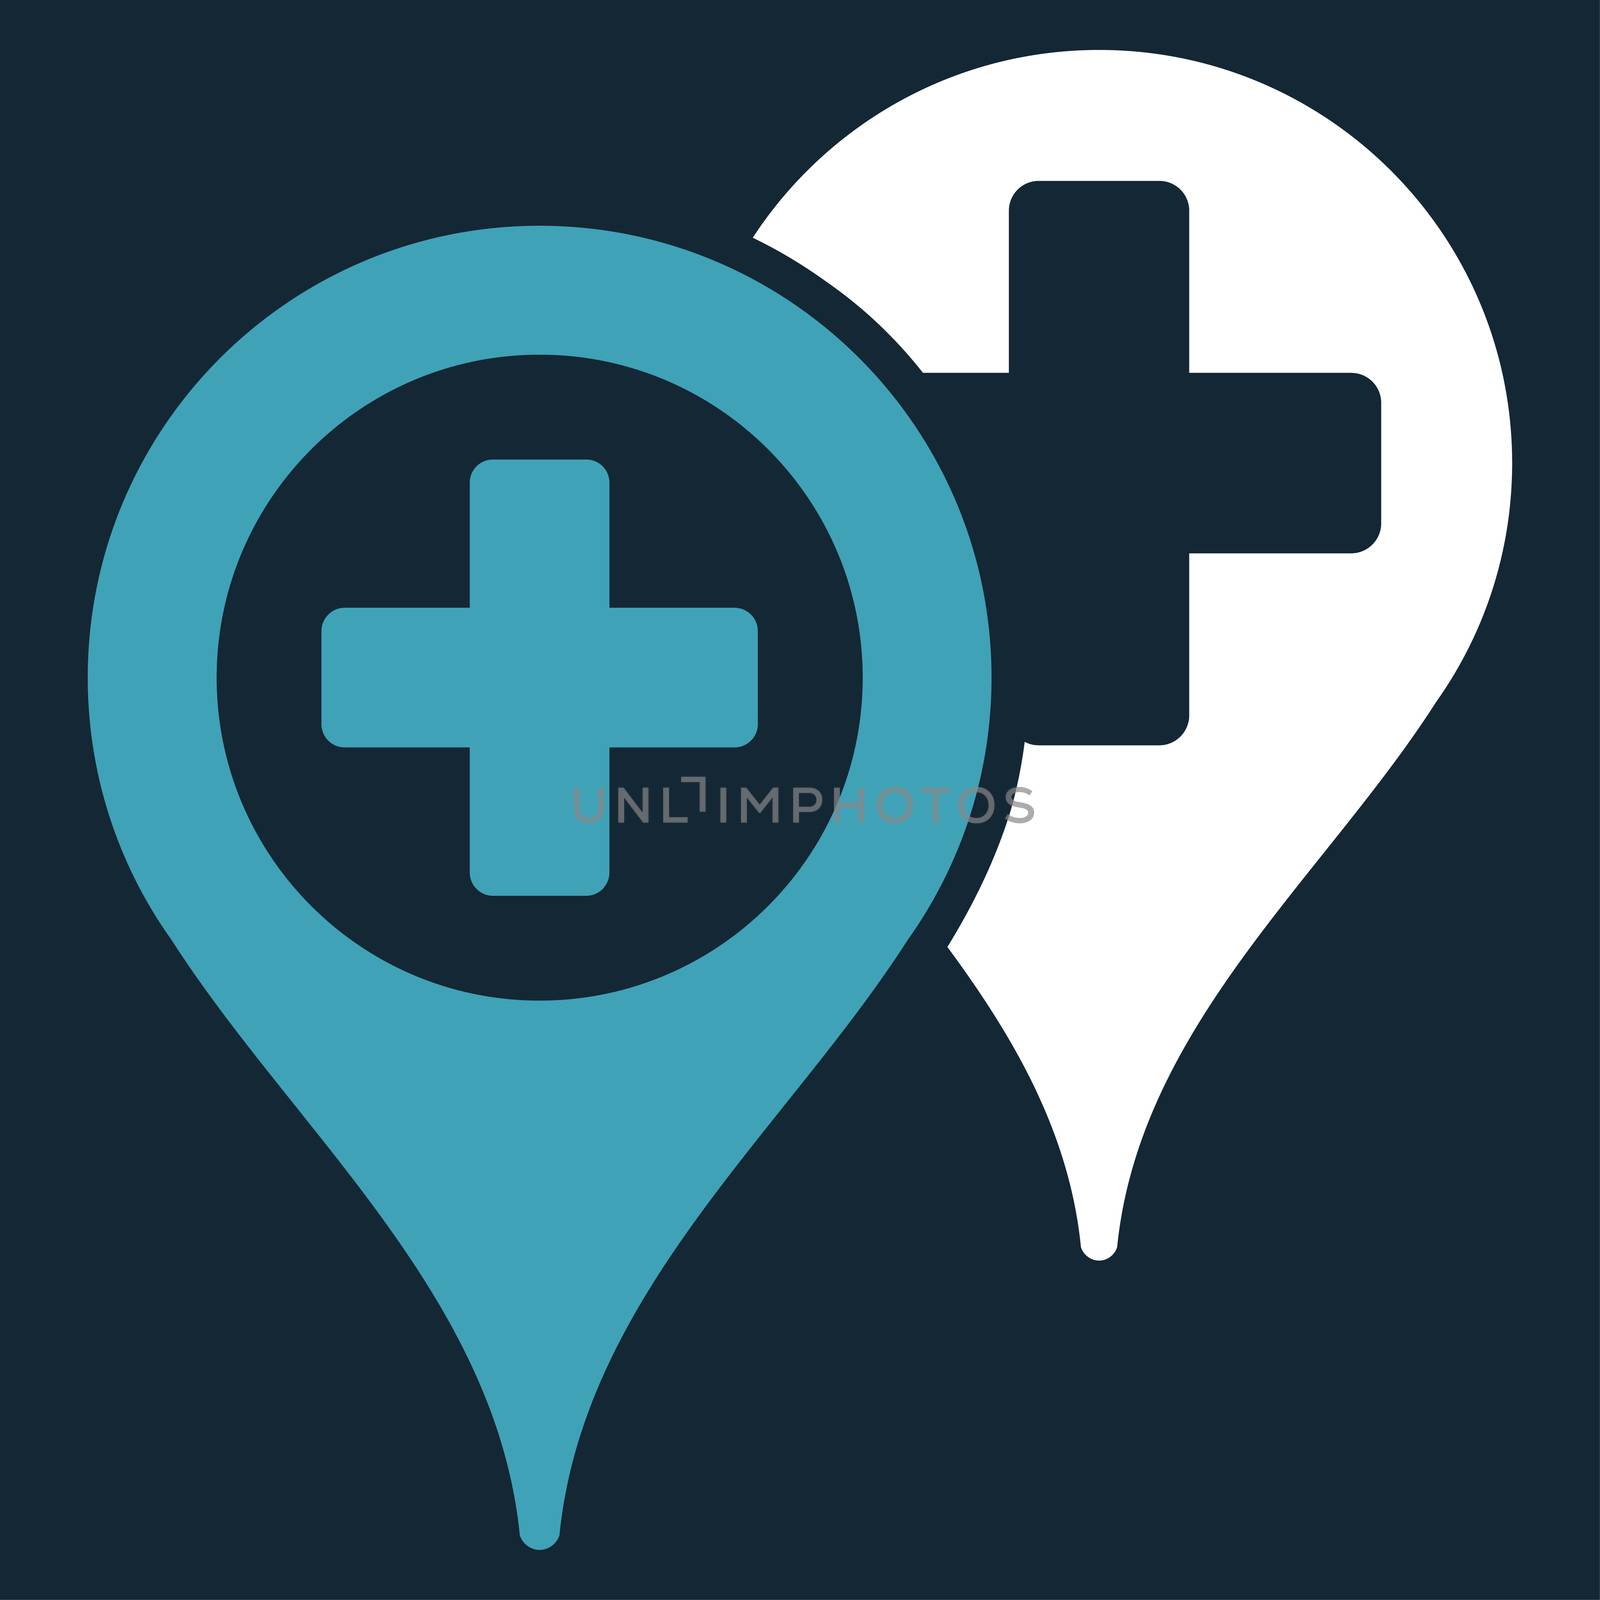 Hospital Map Markers raster icon. Style is bicolor flat symbol, blue and white colors, rounded angles, dark blue background.